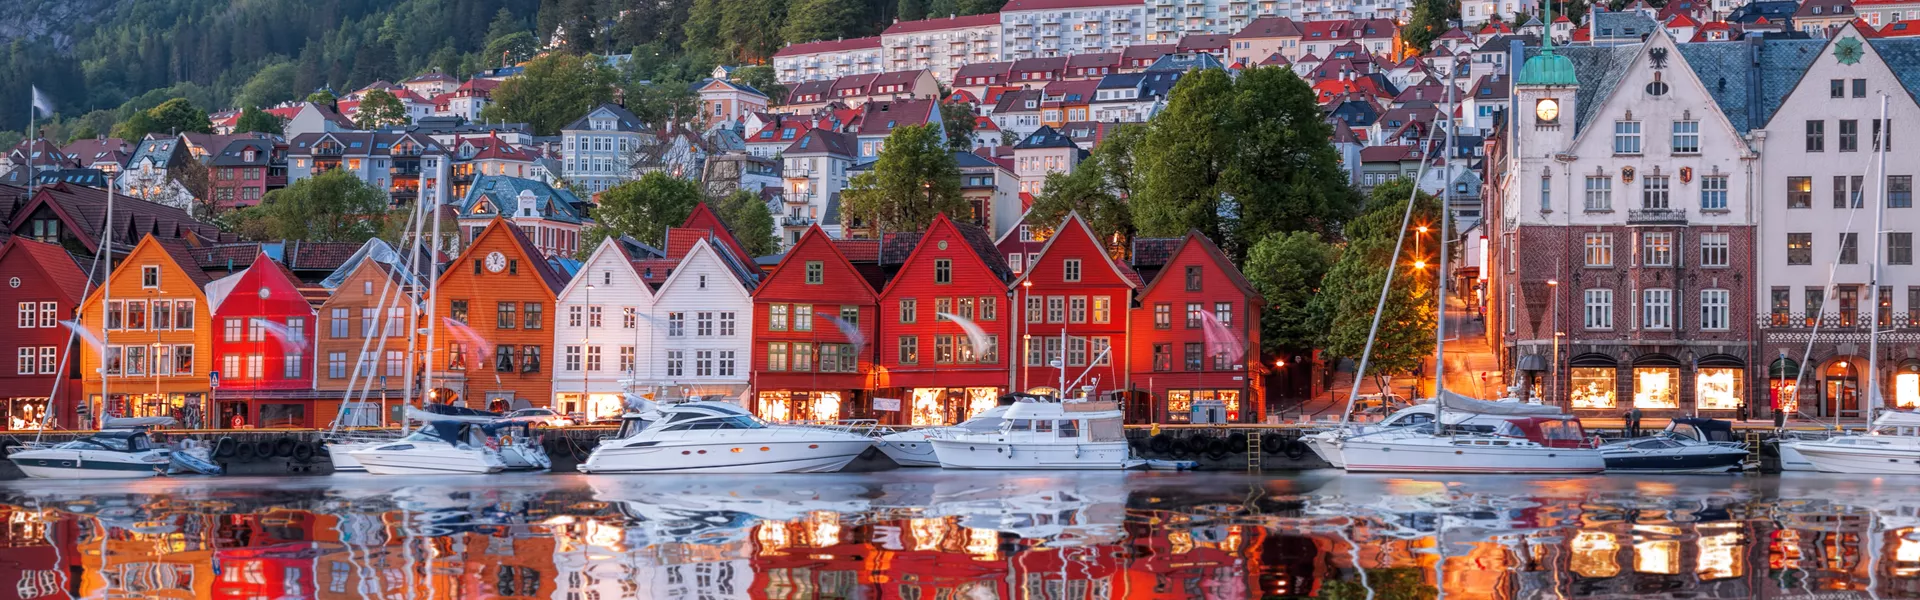 City in mountains, Bryggen, Norway